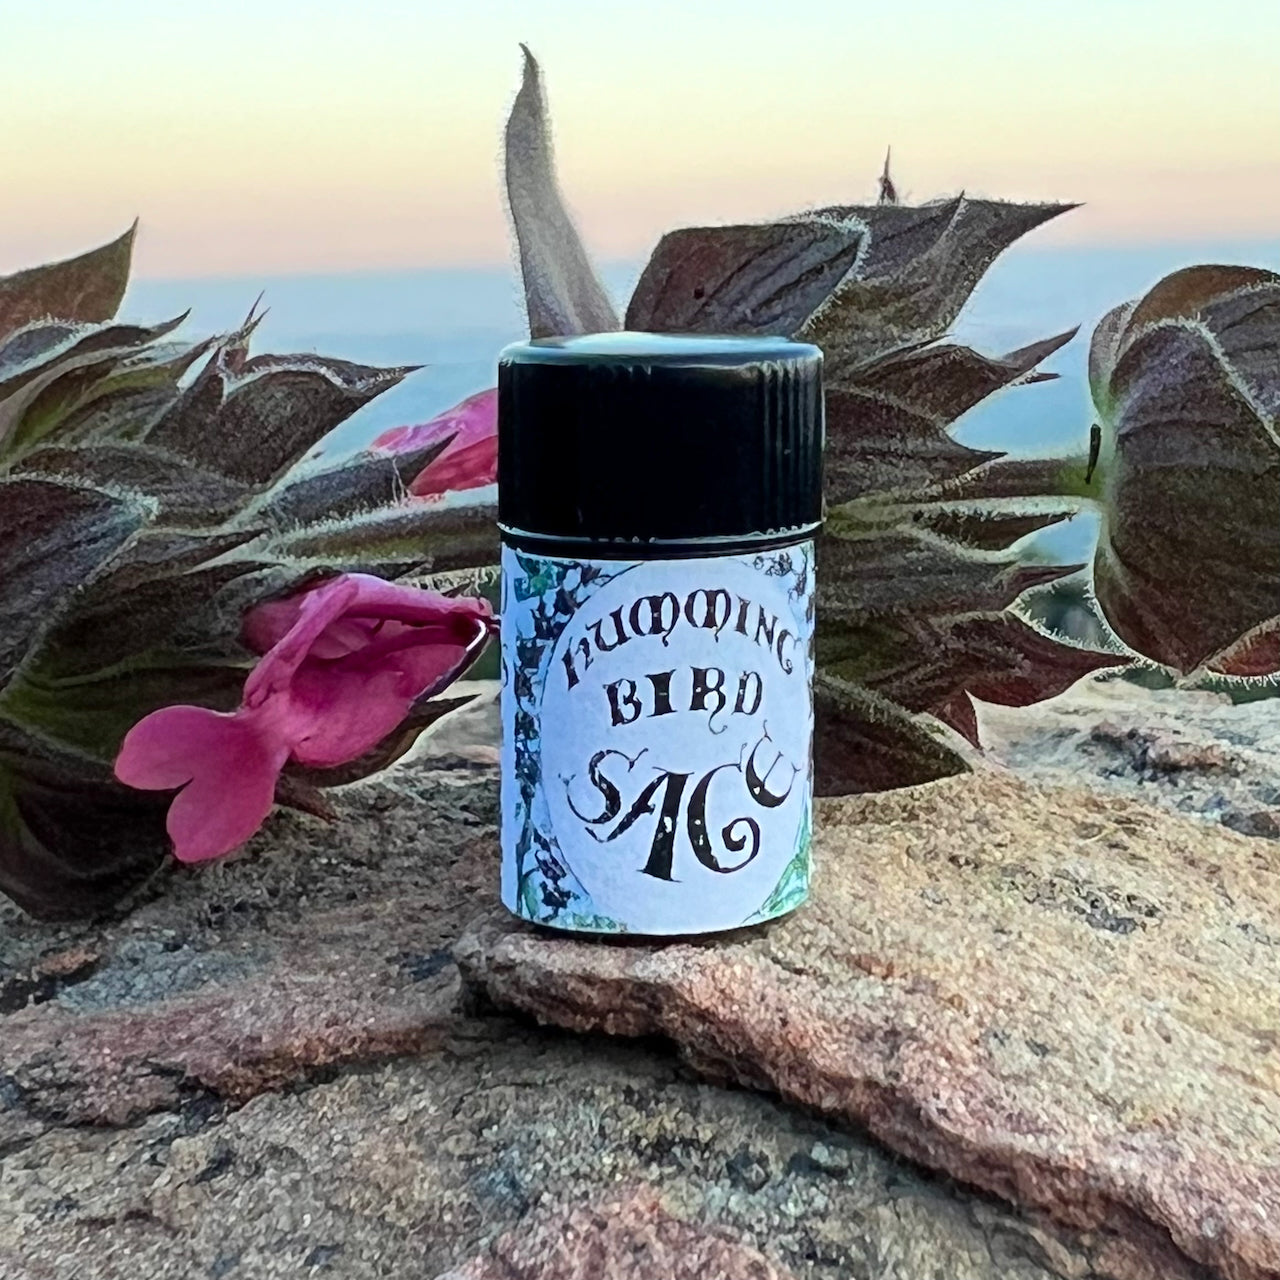 Photograph of Hummingbird Sage Essential oil in 2.3 ml cobalt blue glass bottle on a rock with Hummingbird Sage flower